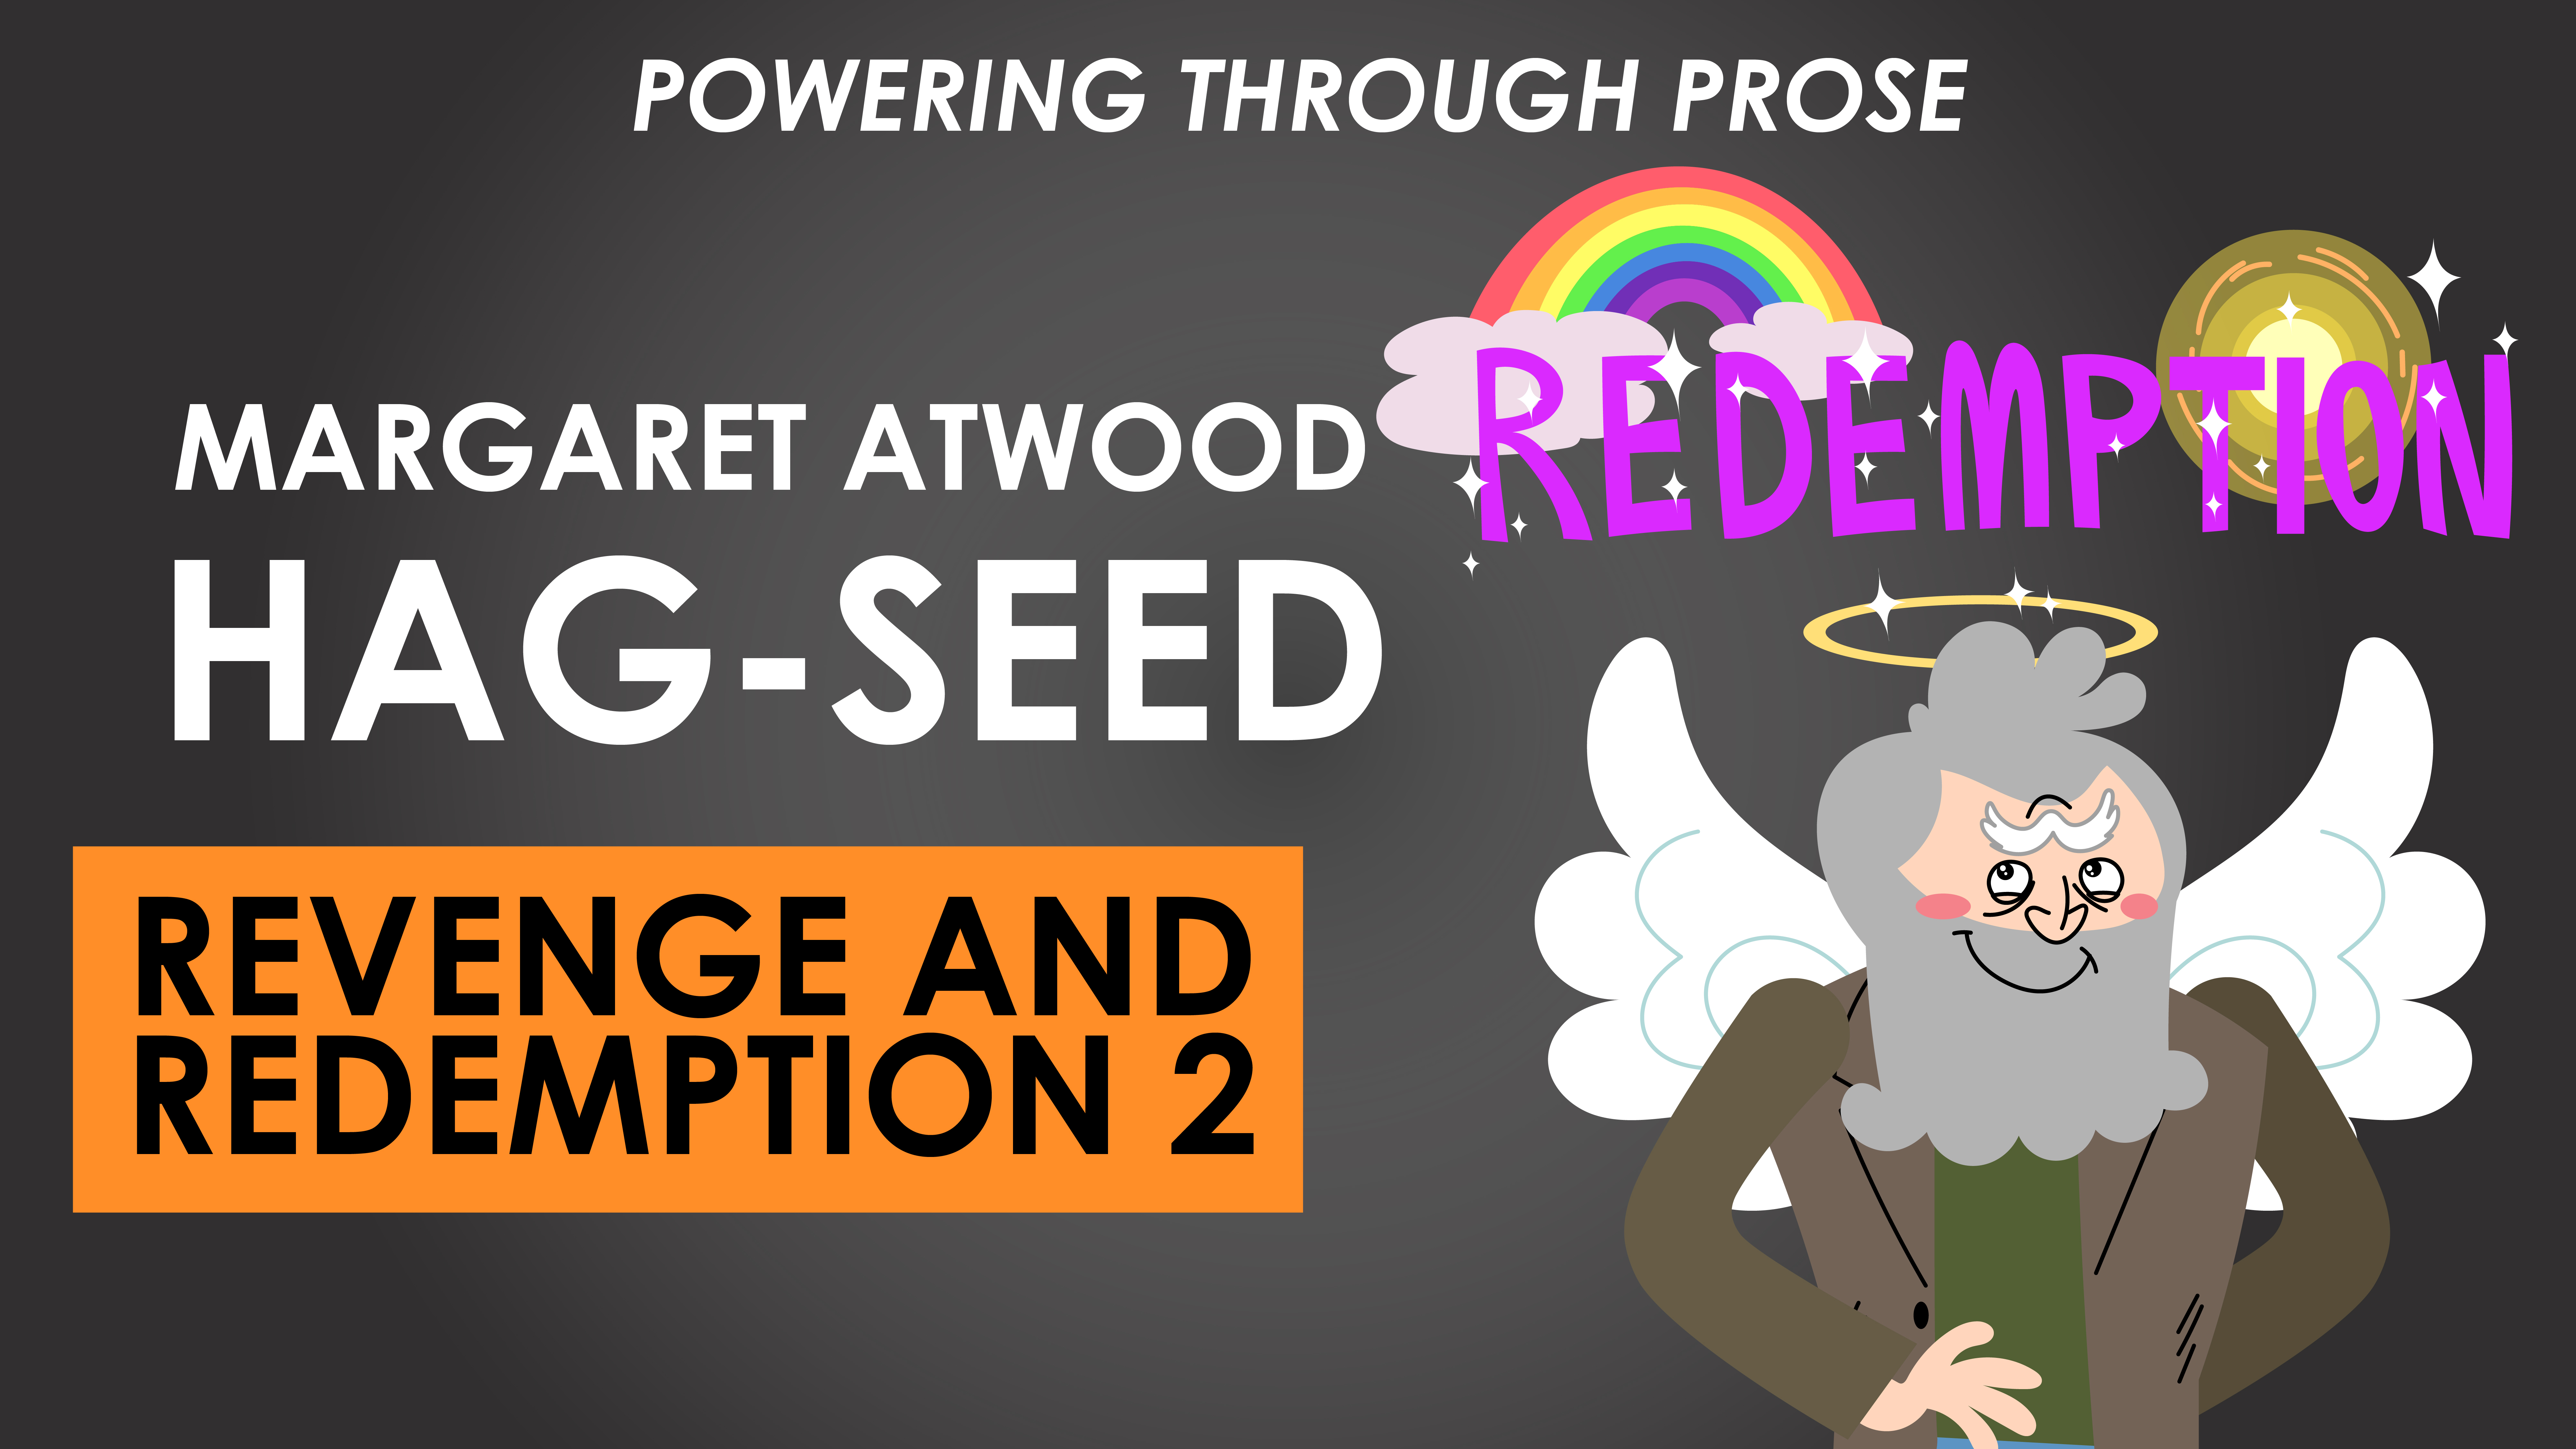 Hag-Seed - Margaret Atwood - Revenge and Redemption 2 - Powering through Prose Series